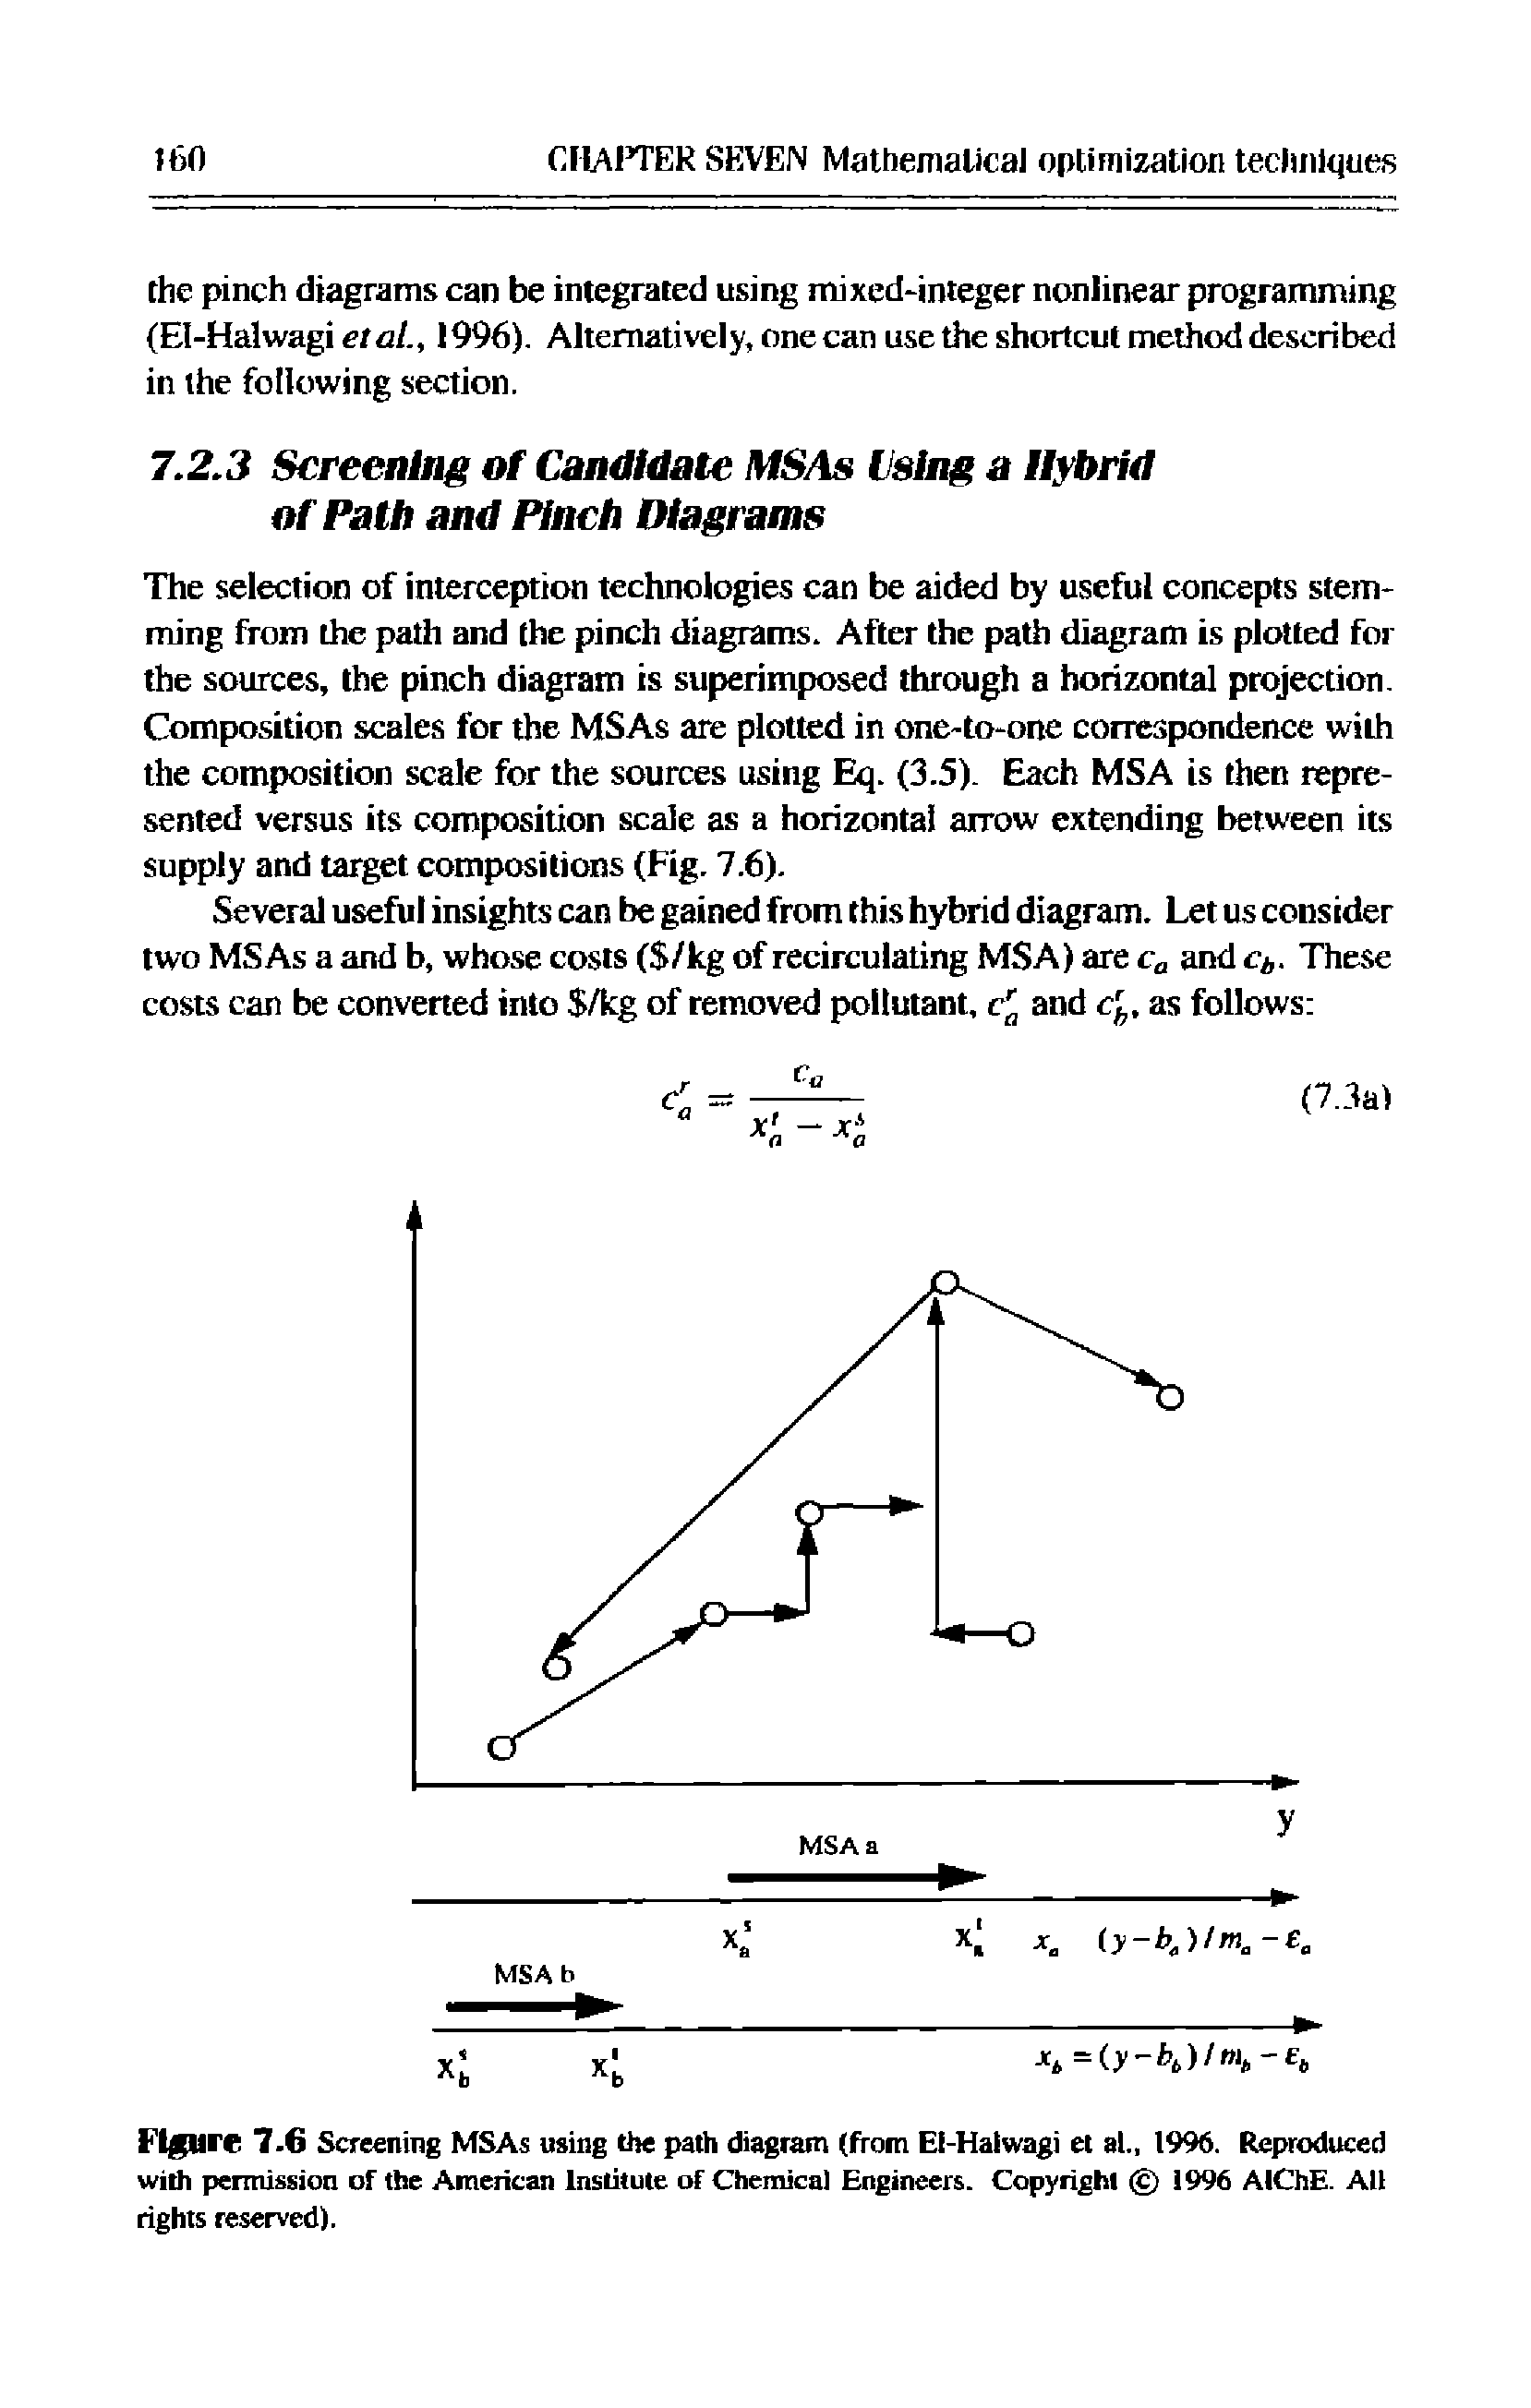 Figure 7.6 Screening MSAs using the path diagram (from Ei-Hatwagi et al., 1996. Reproduced with permission of the American Institute of Chemical Engineers. Copyright 1996 AlChE. All rights reserved).